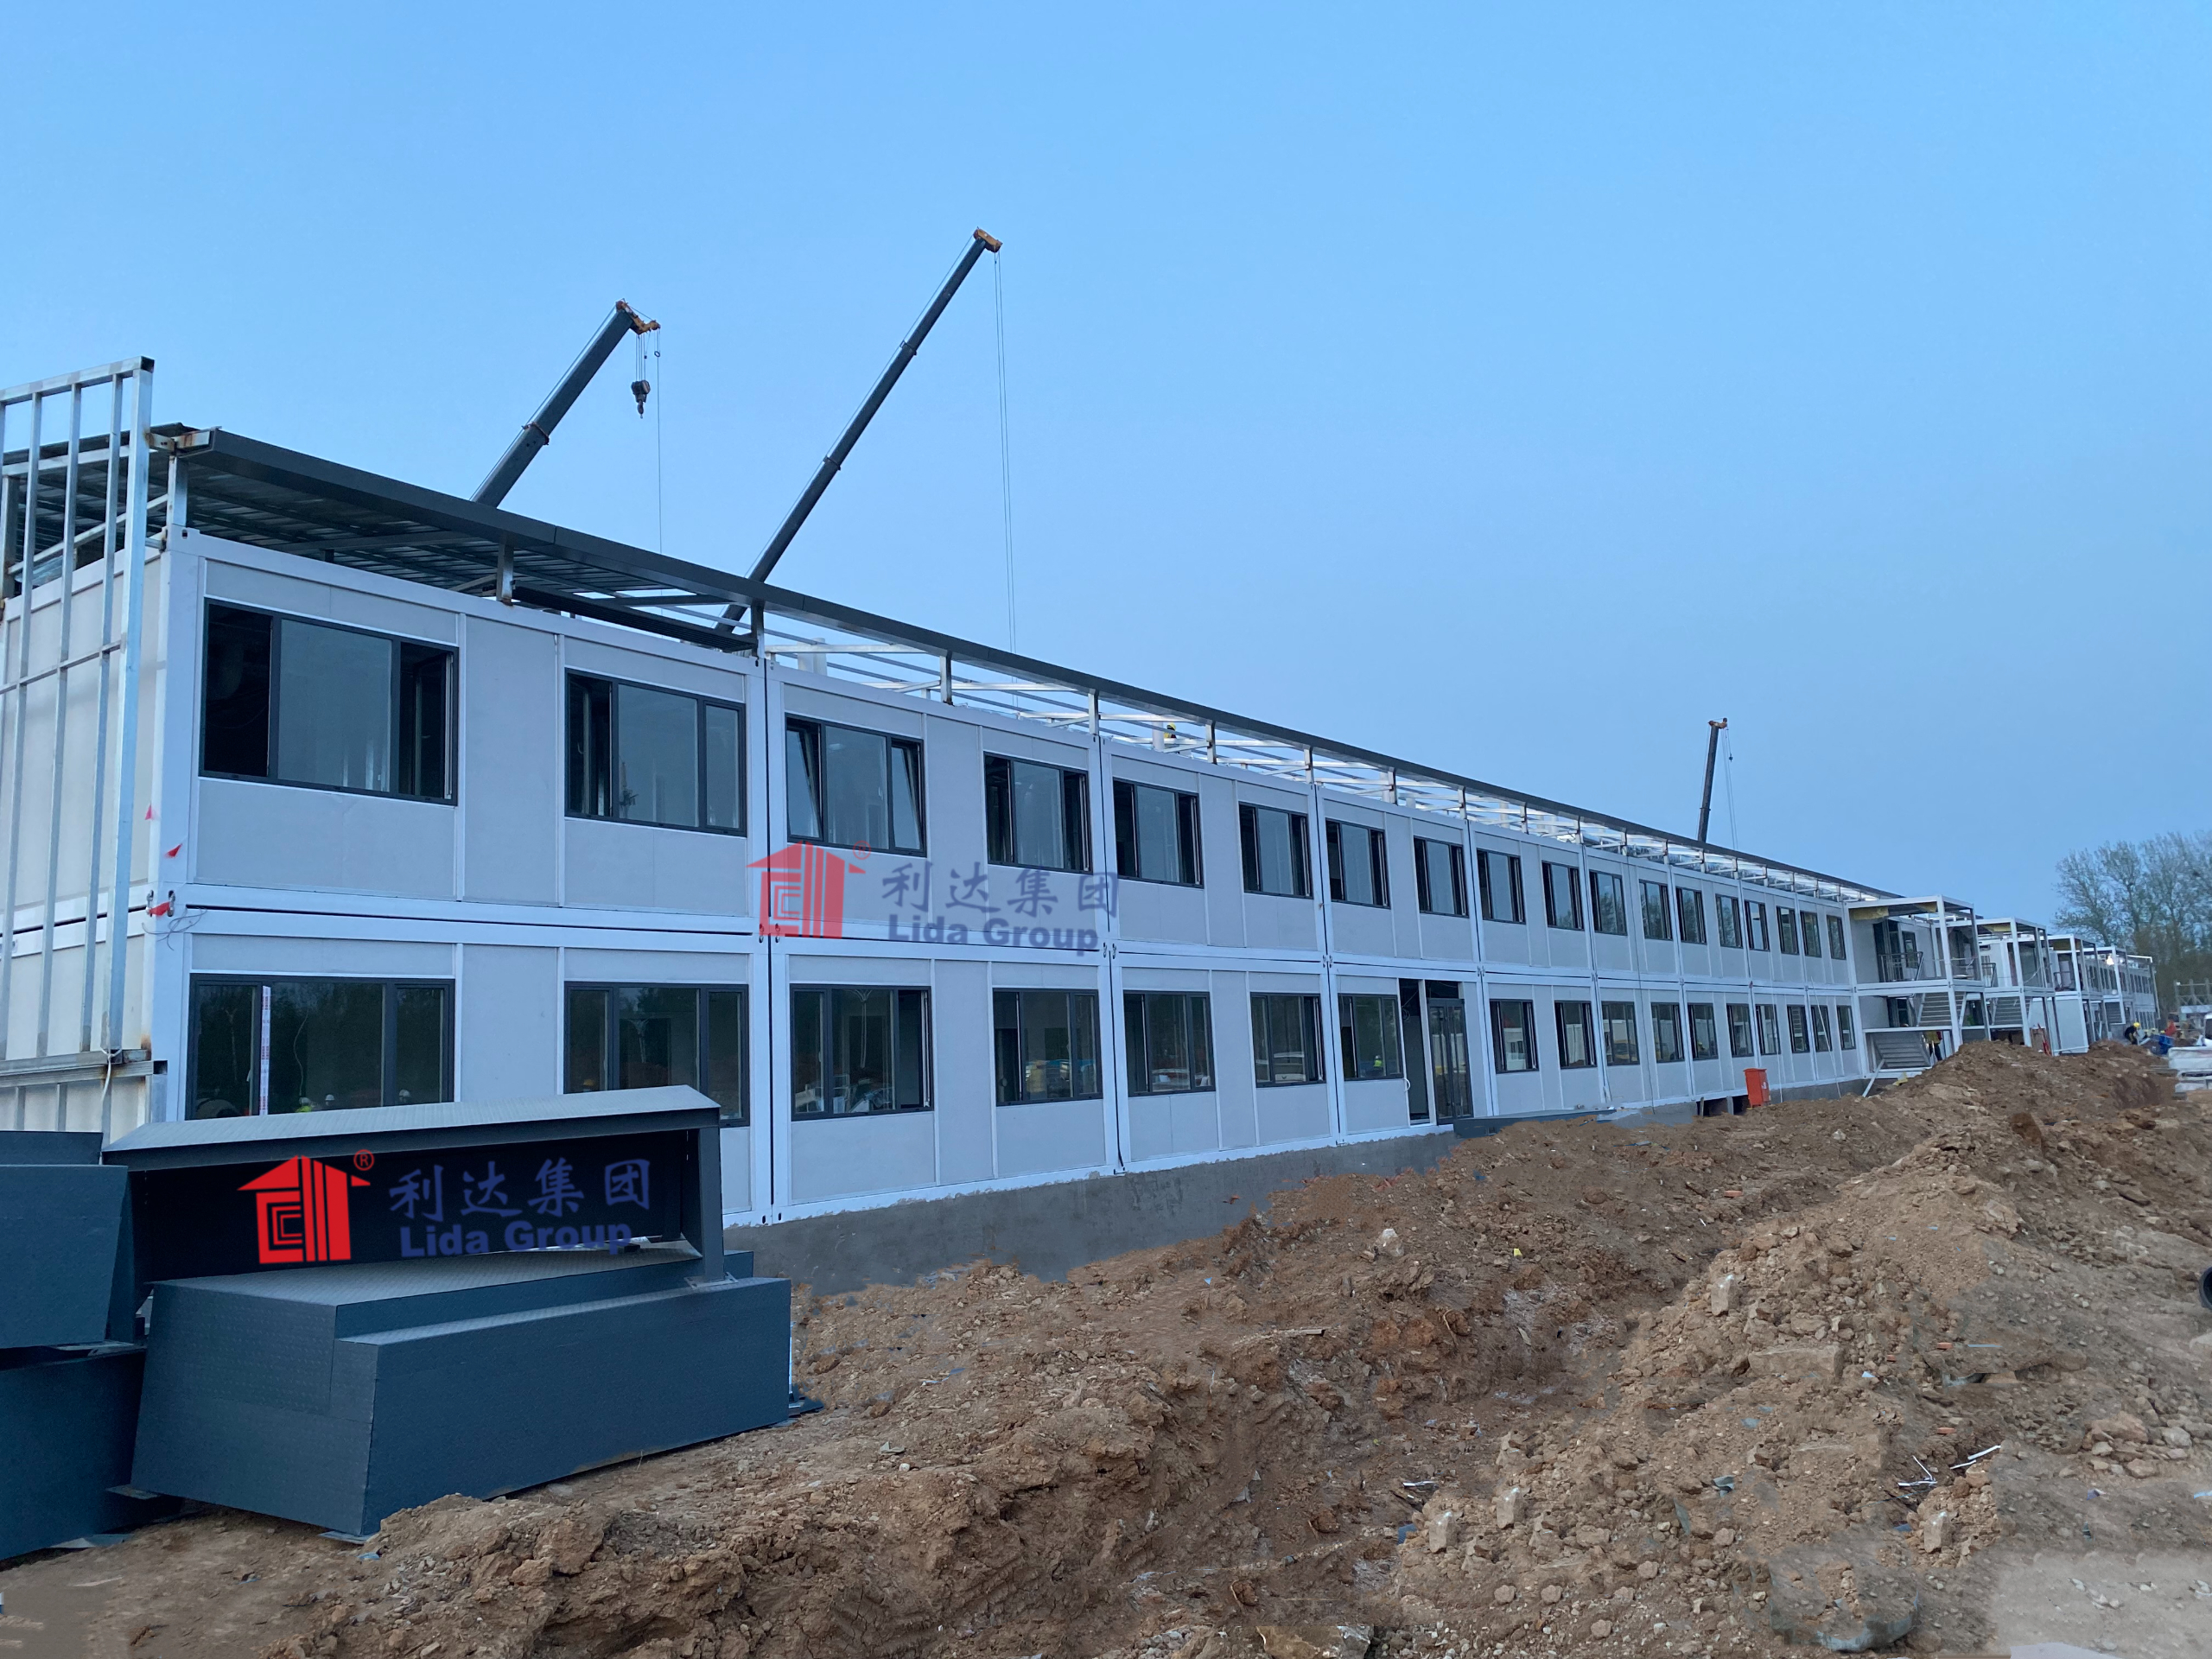 Case study shows how Lida Group built temporary shelters using recycled shipping containers to establish a prefab container housing facility for victims of forced labor